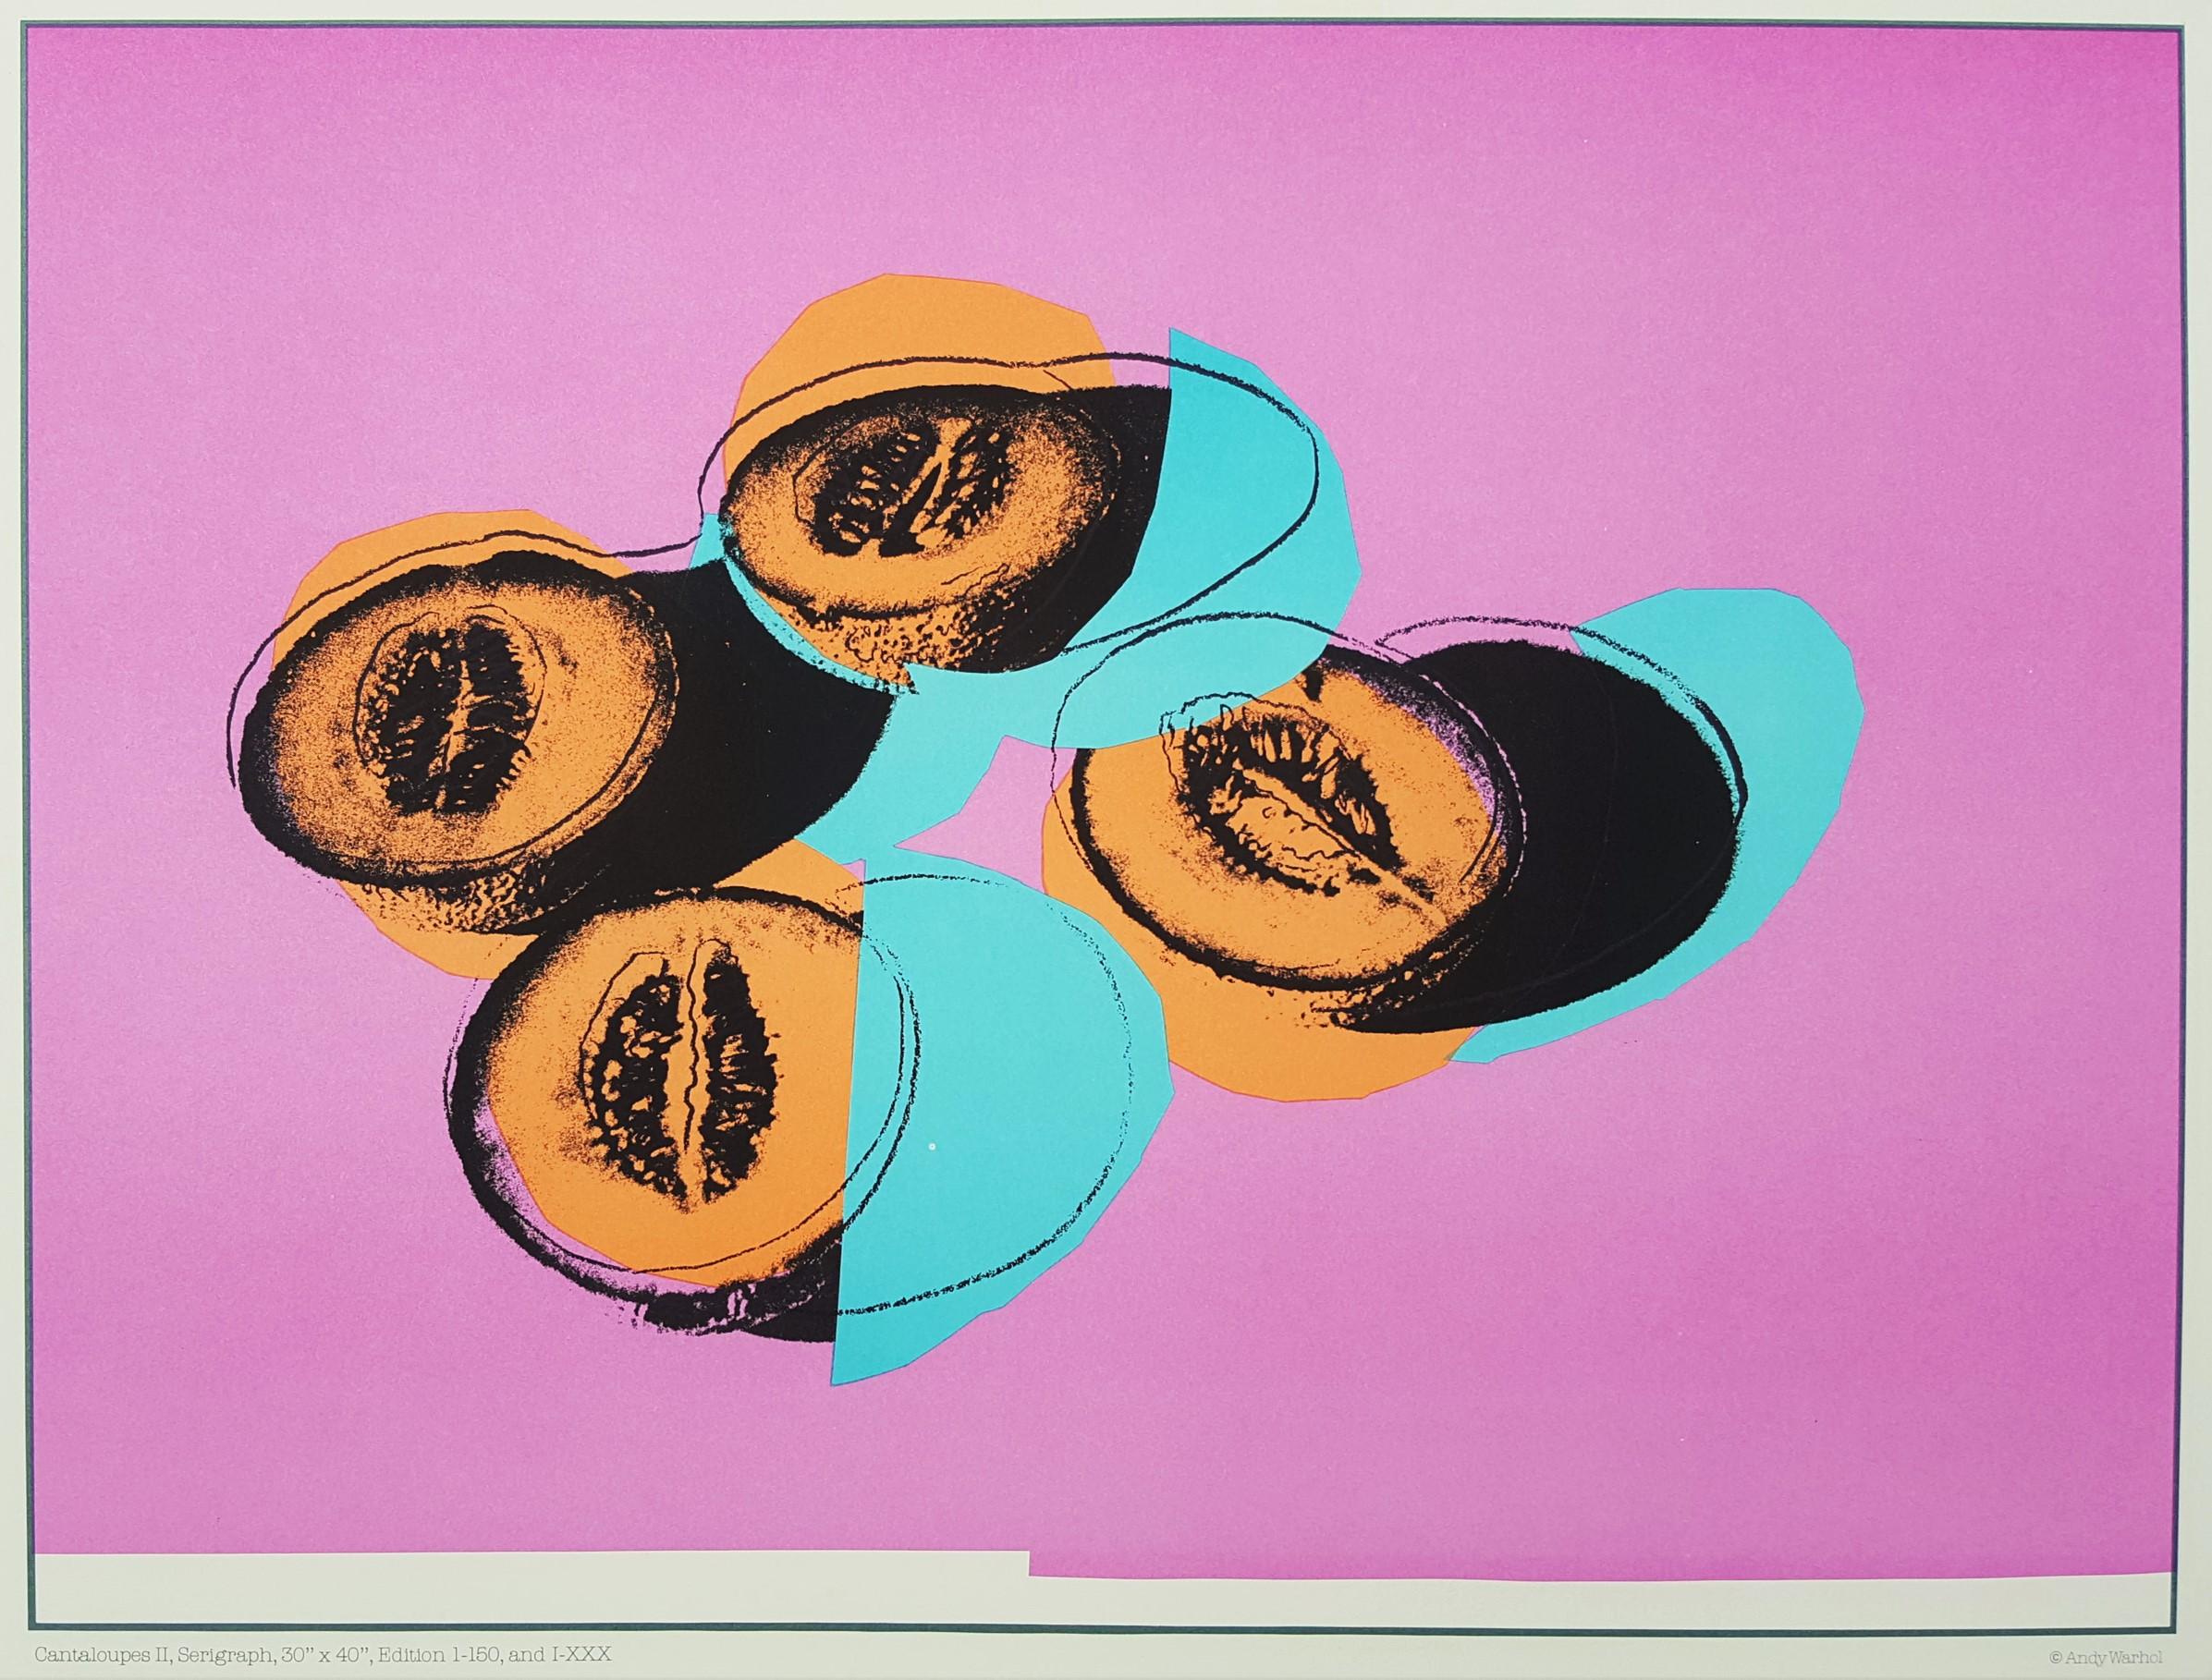 Cantaloupes II (Space Fruit: Stills Lifes) - Print by Andy Warhol